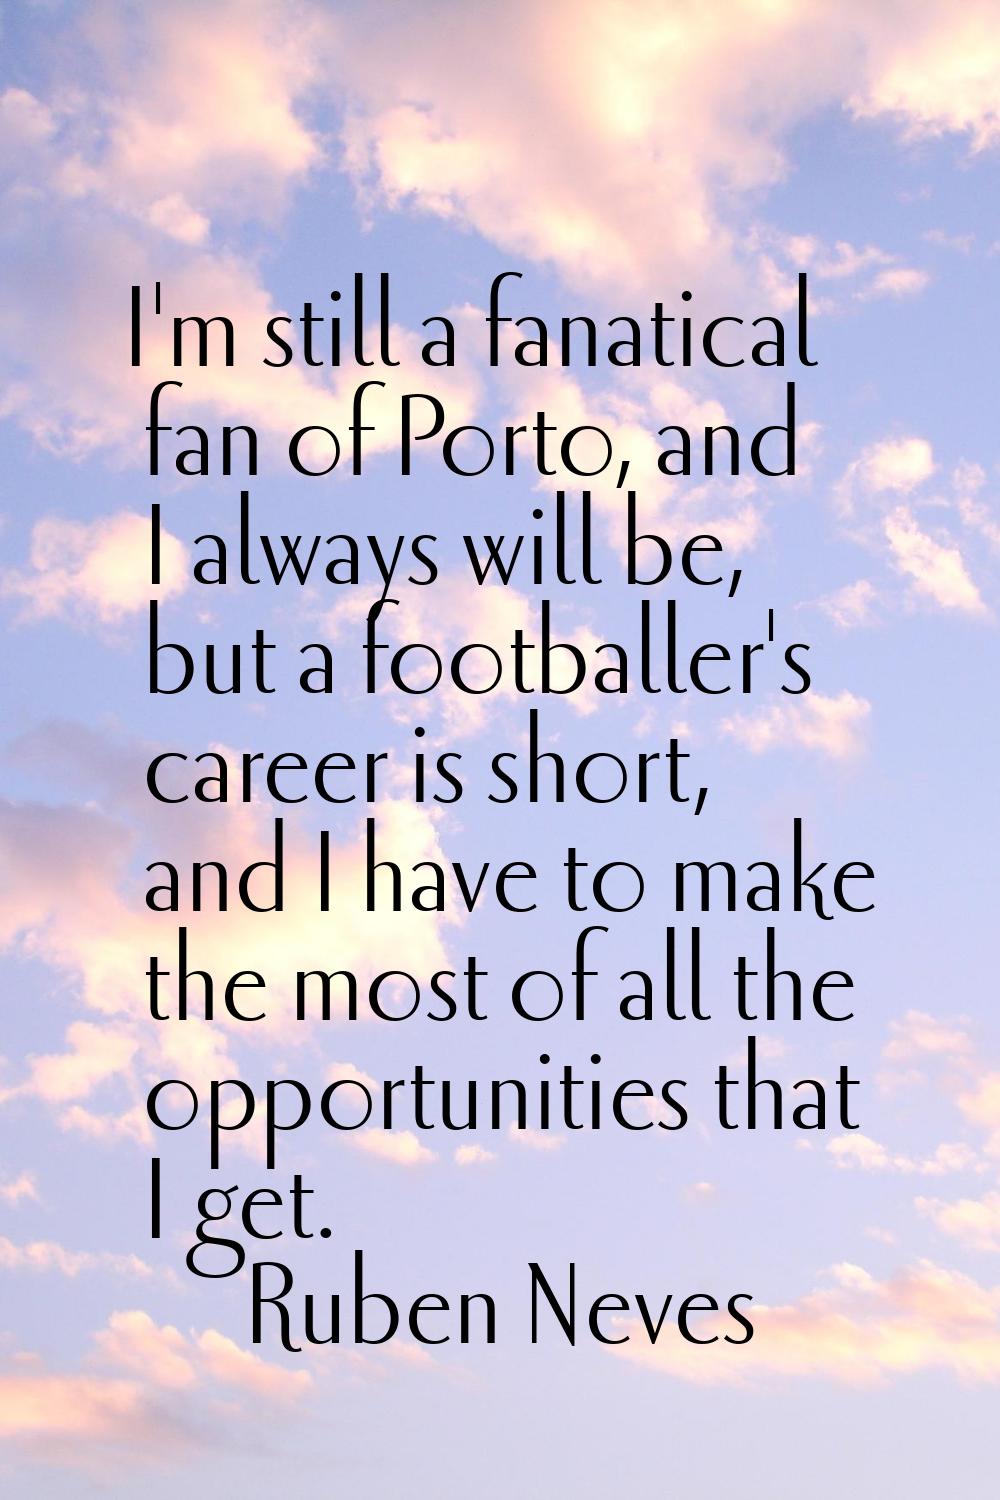 I'm still a fanatical fan of Porto, and I always will be, but a footballer's career is short, and I